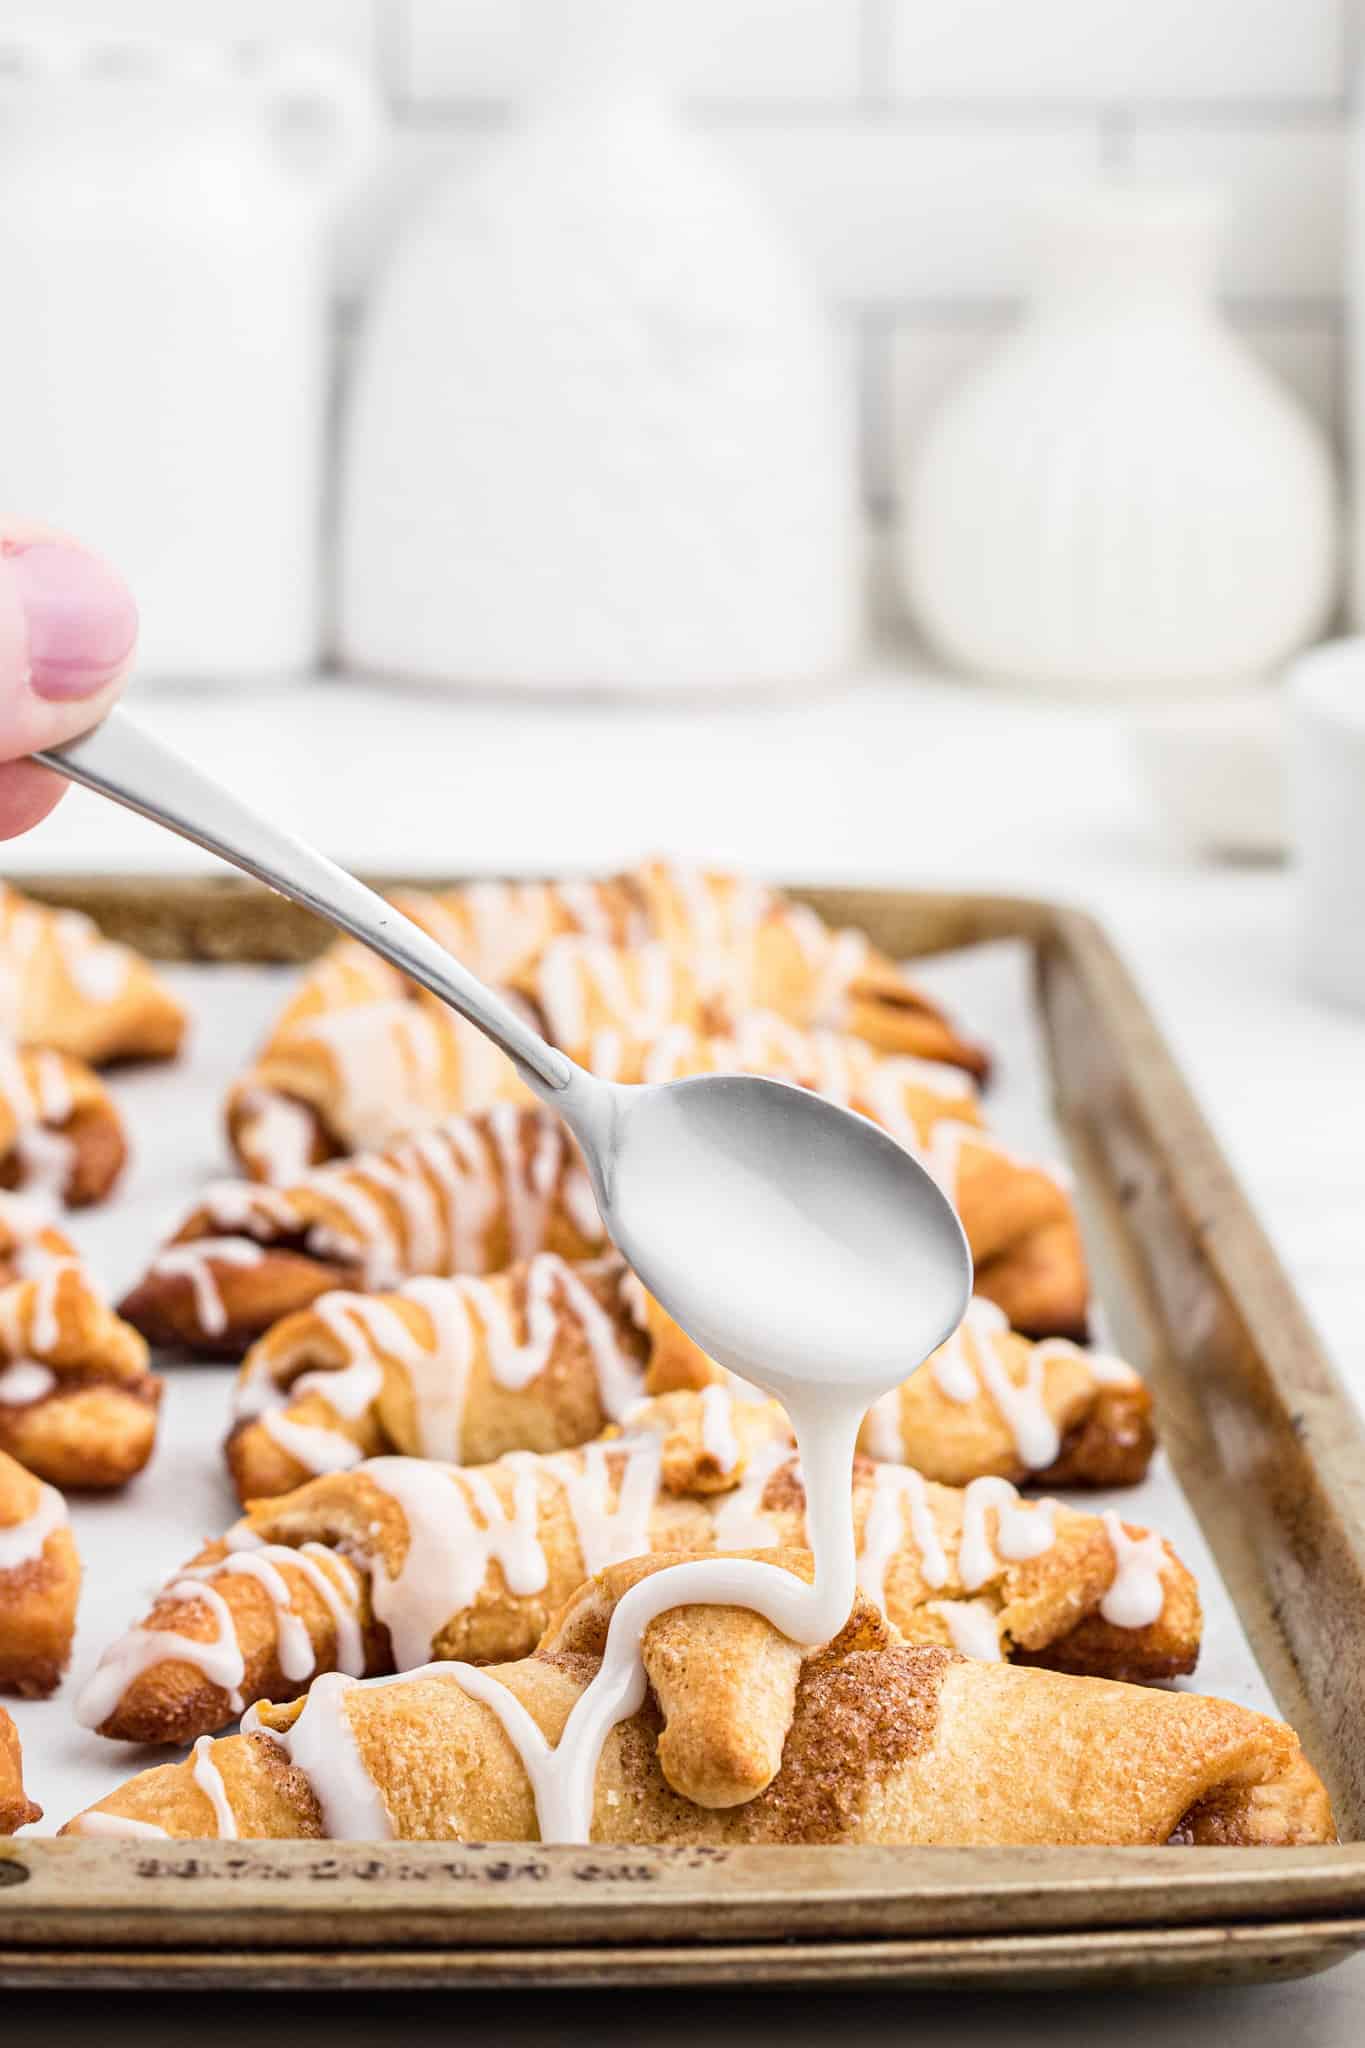 Cinnamon Crescent Rolls are an easy breakfast or dessert recipe using Pillsbury crescent rolls filled with a sweet cinnamon mixture and drizzled with icing.